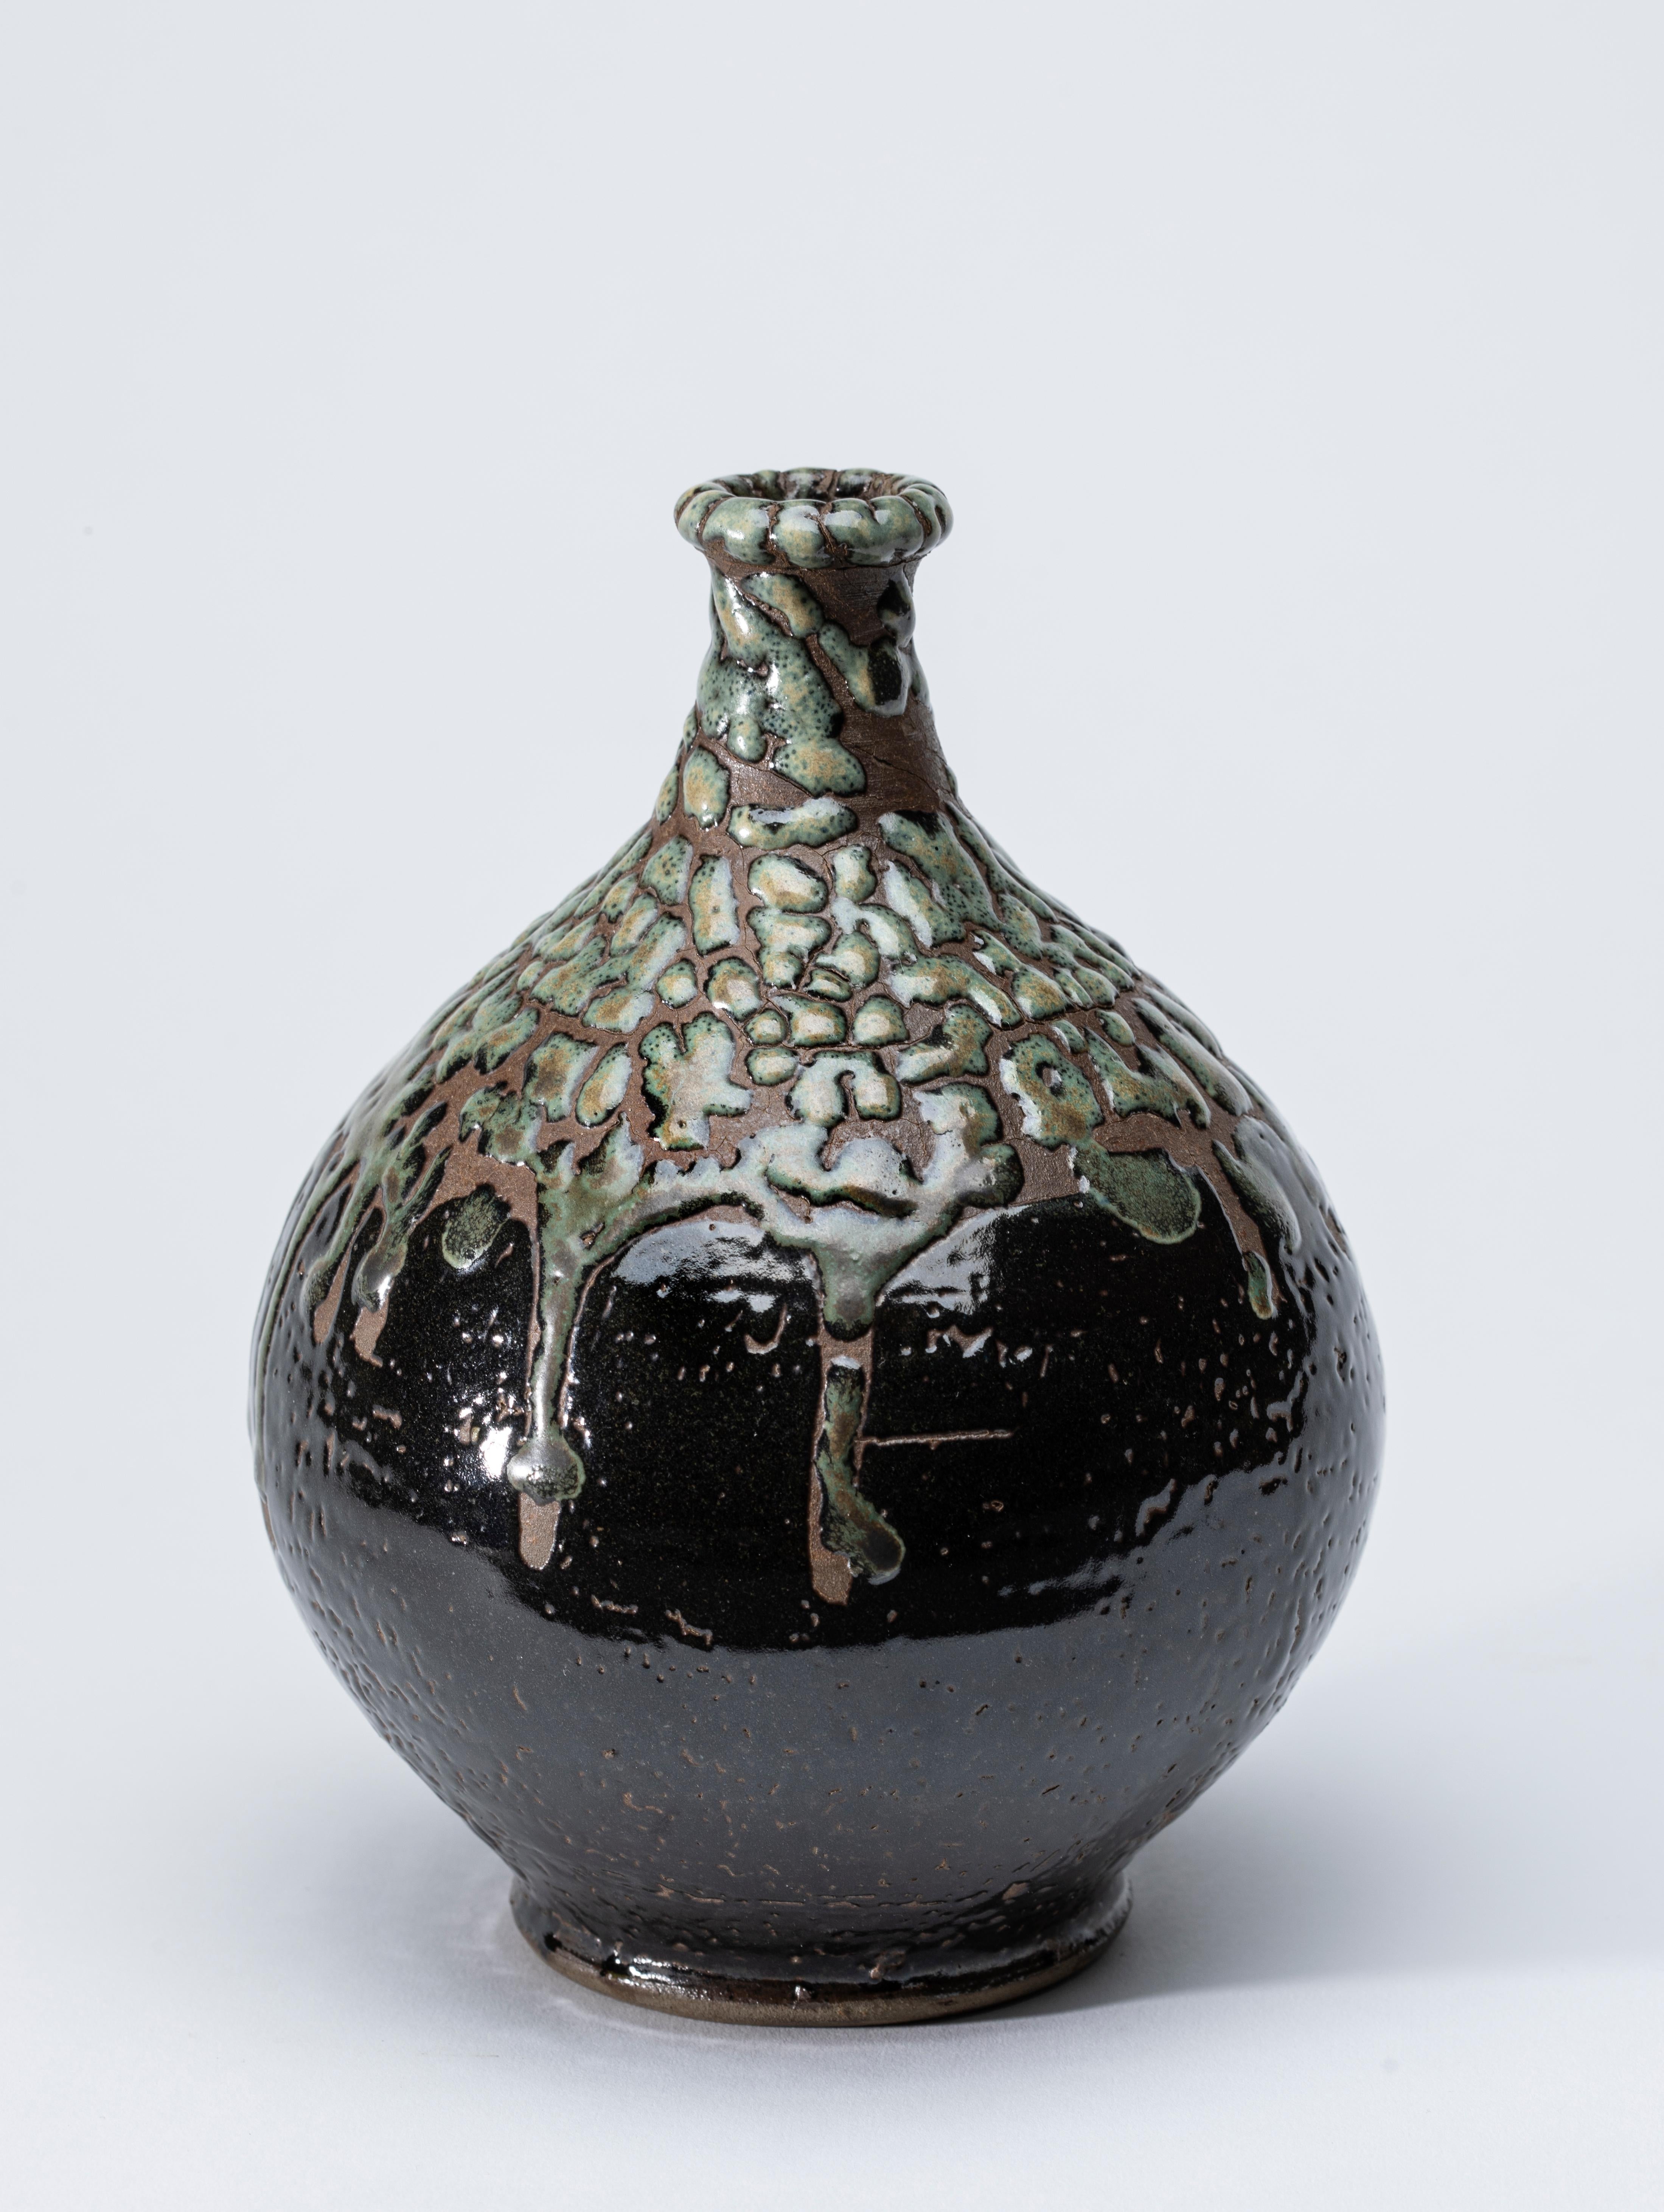 Green and Dark Brown Japanese Vase with Green Raised Glaze In Excellent Condition For Sale In Santa Cruz, CA